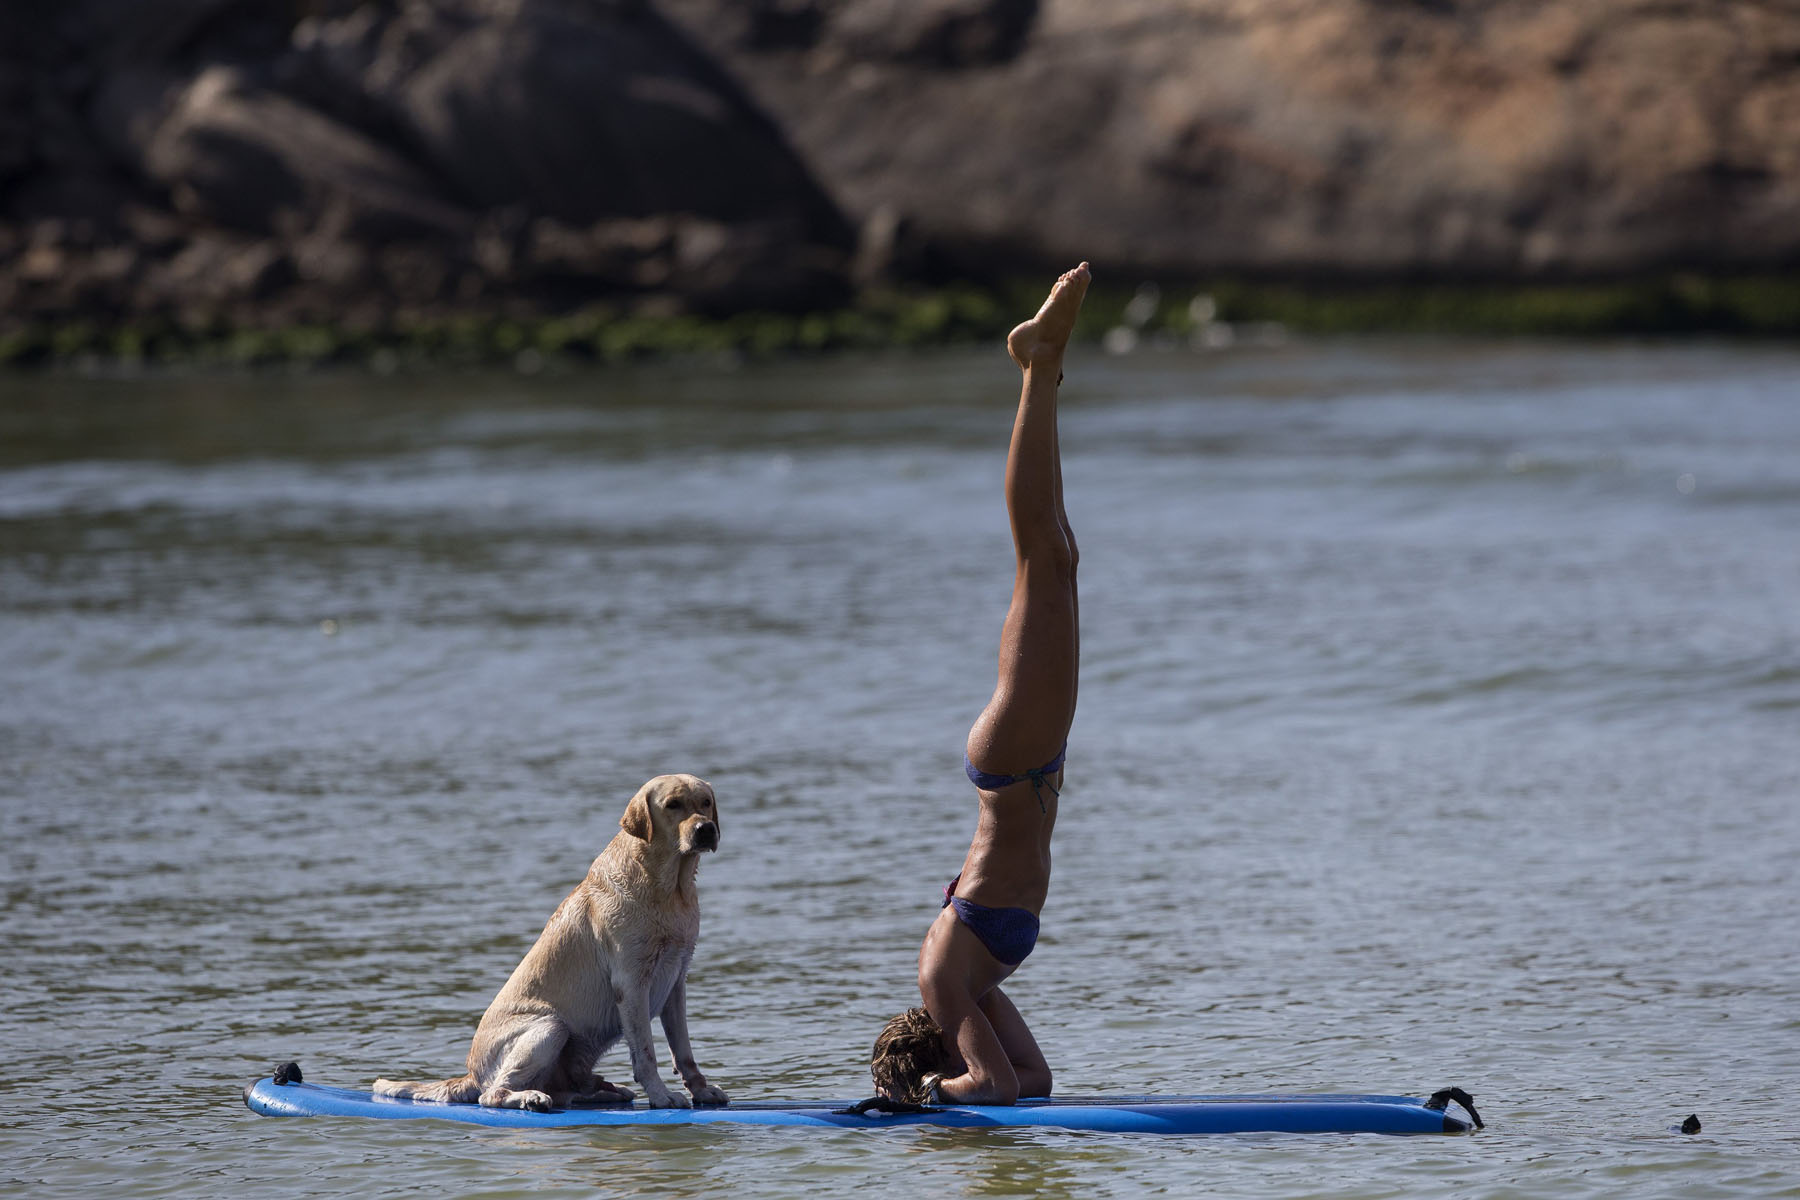 Cecilia Canetti practices yoga on a stand-up paddle board as her dog Polo accompanies her off Barra de Tijuca beach in Rio de Janeiro, Jan. 16, 2014.